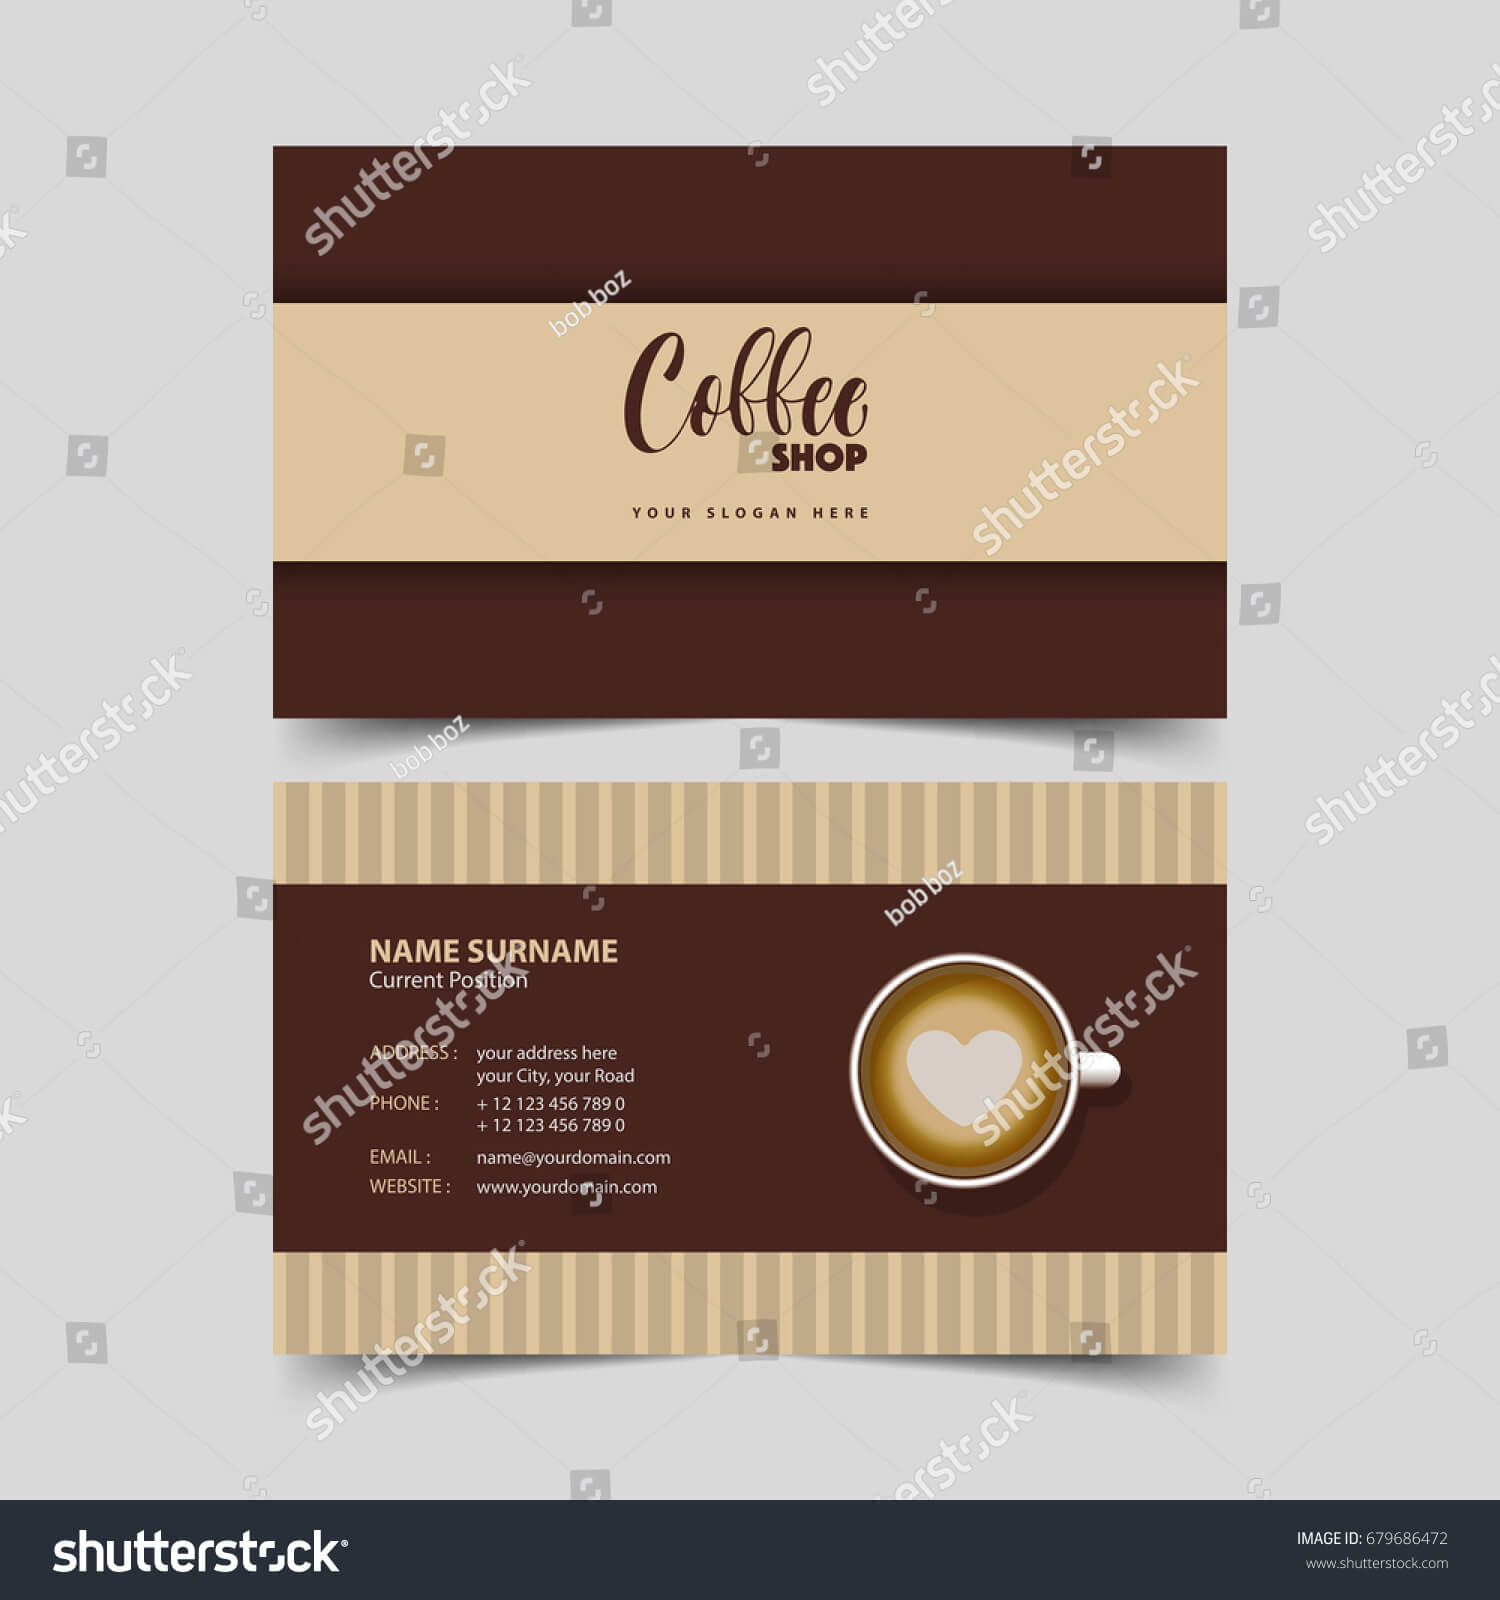 Coffee Shop Business Card Design Template Stock Vector Throughout Coffee Business Card Template Free